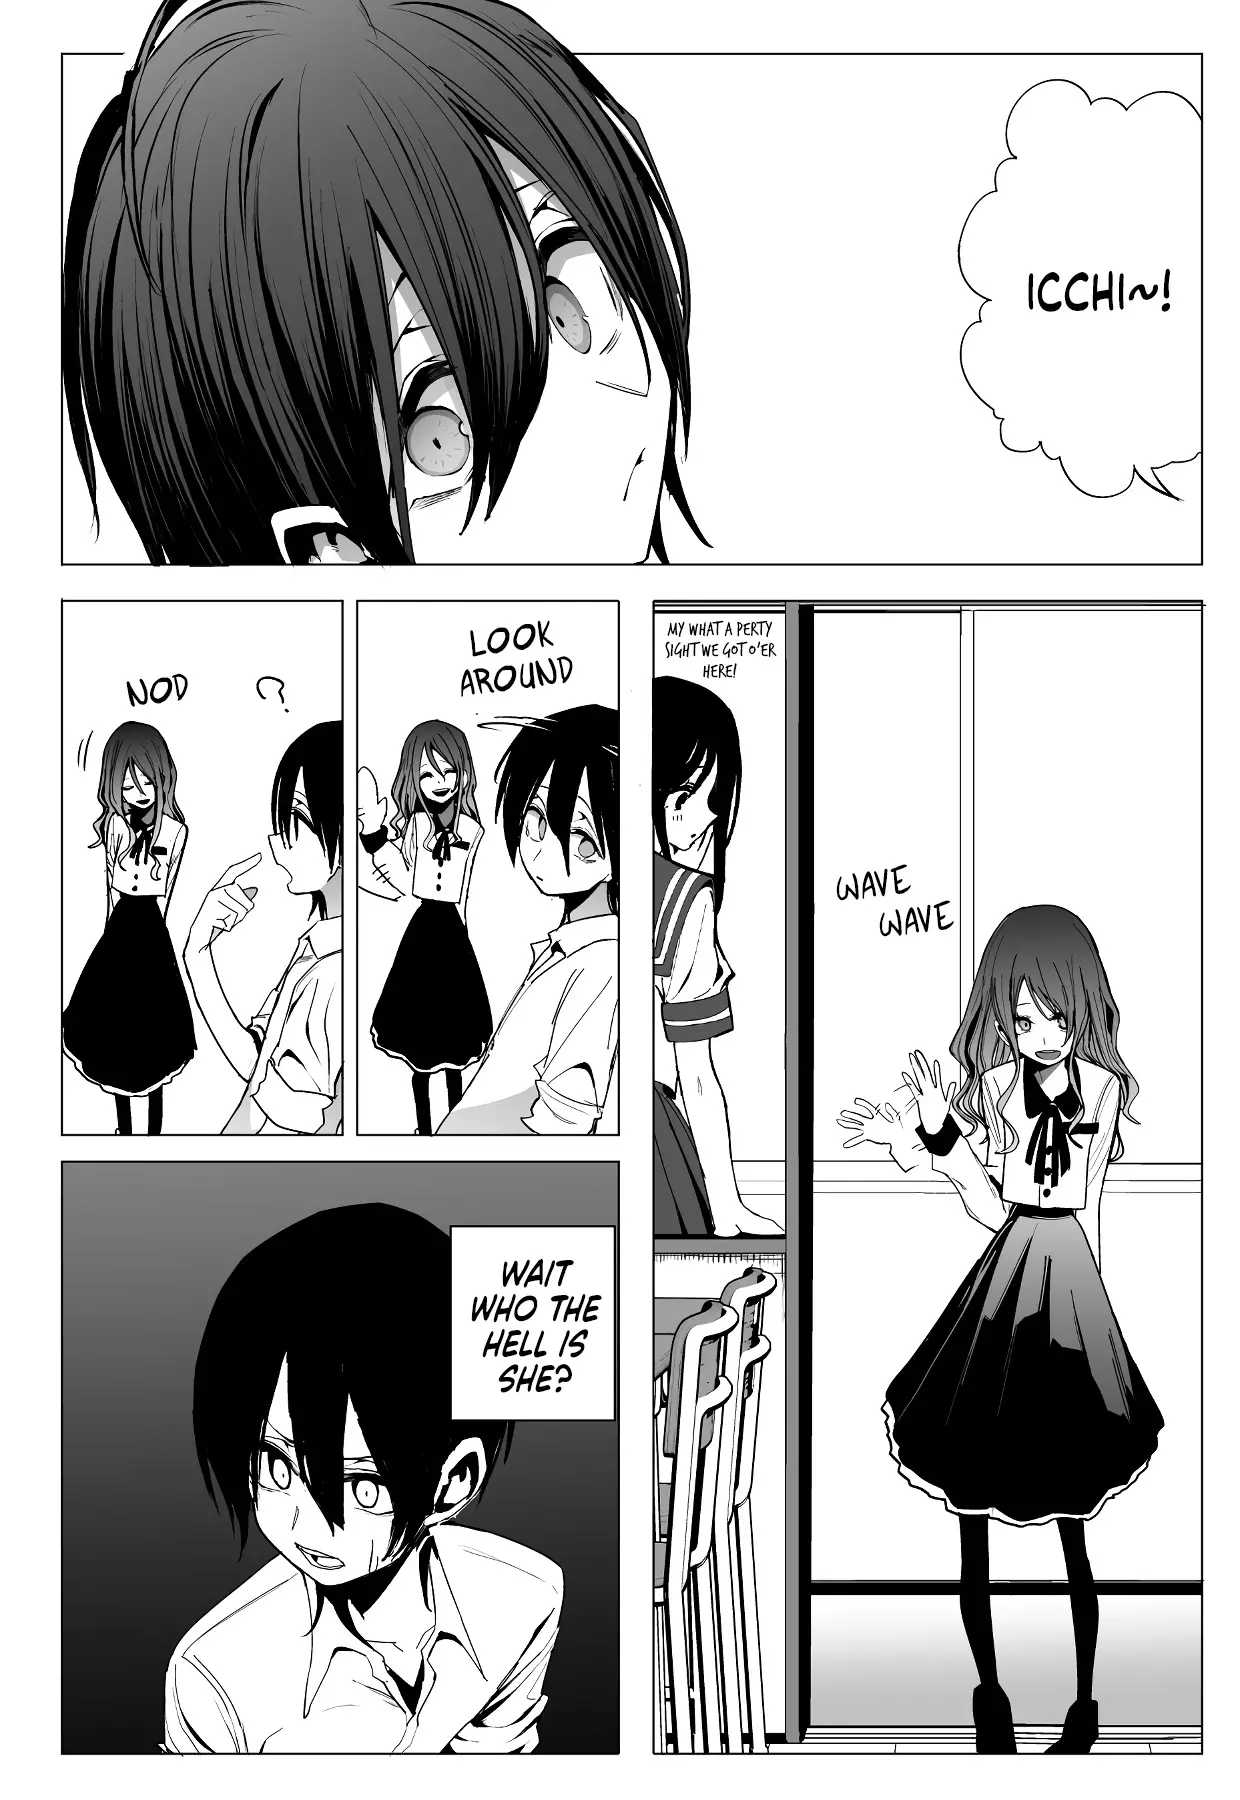 Mitsuishi-San Is Being Weird This Year - 24 page 2-eb1cdd0d